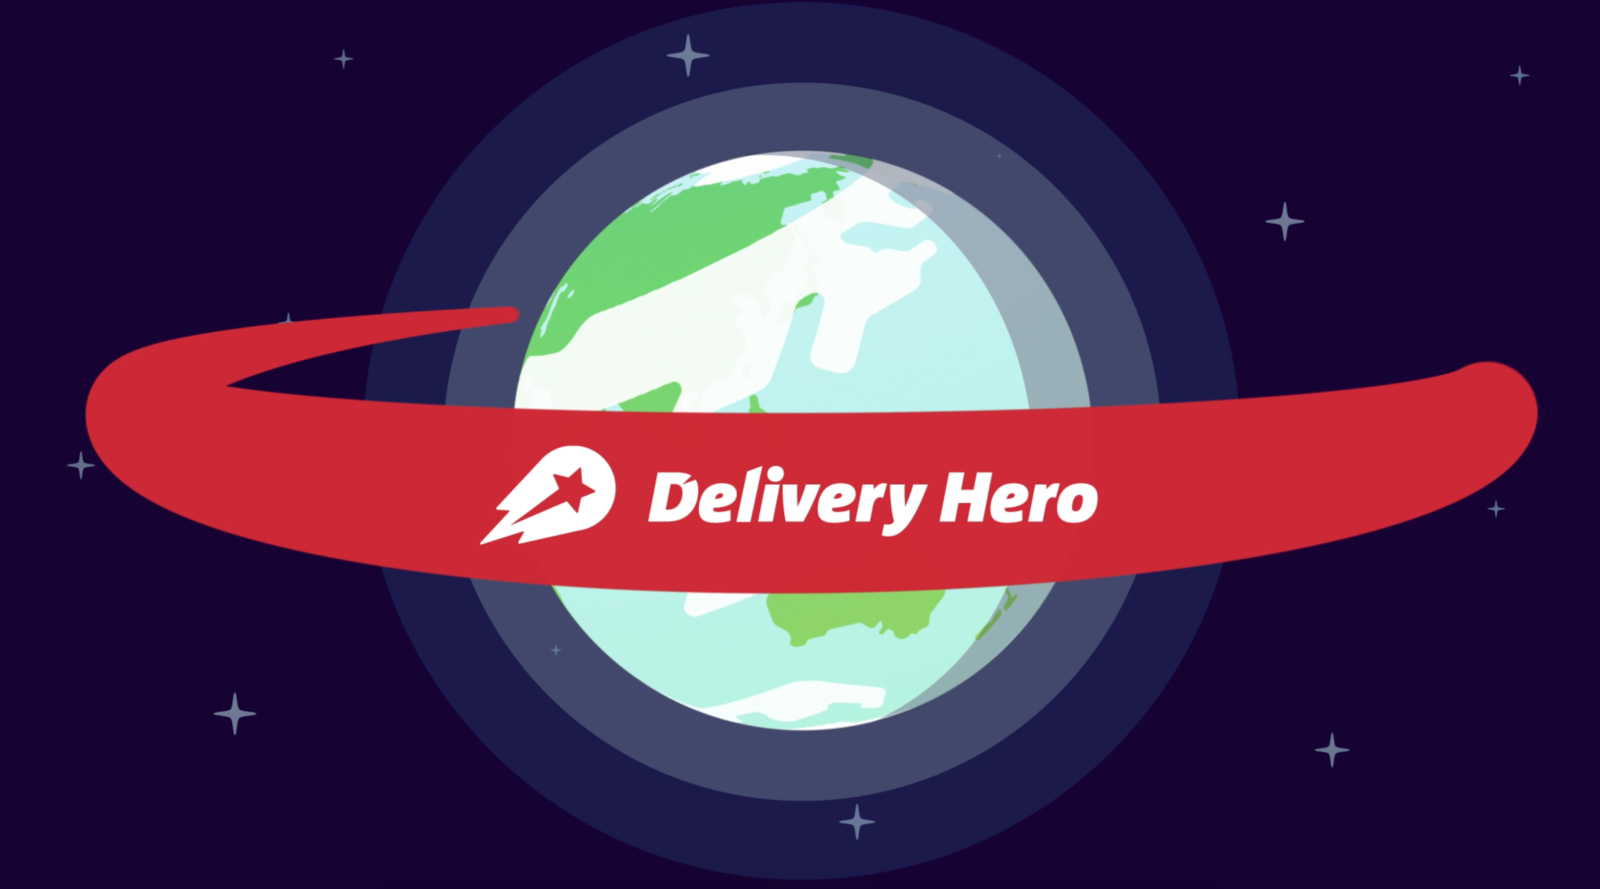 Delivery Hero introduces no-contact delivery and increased safety measures